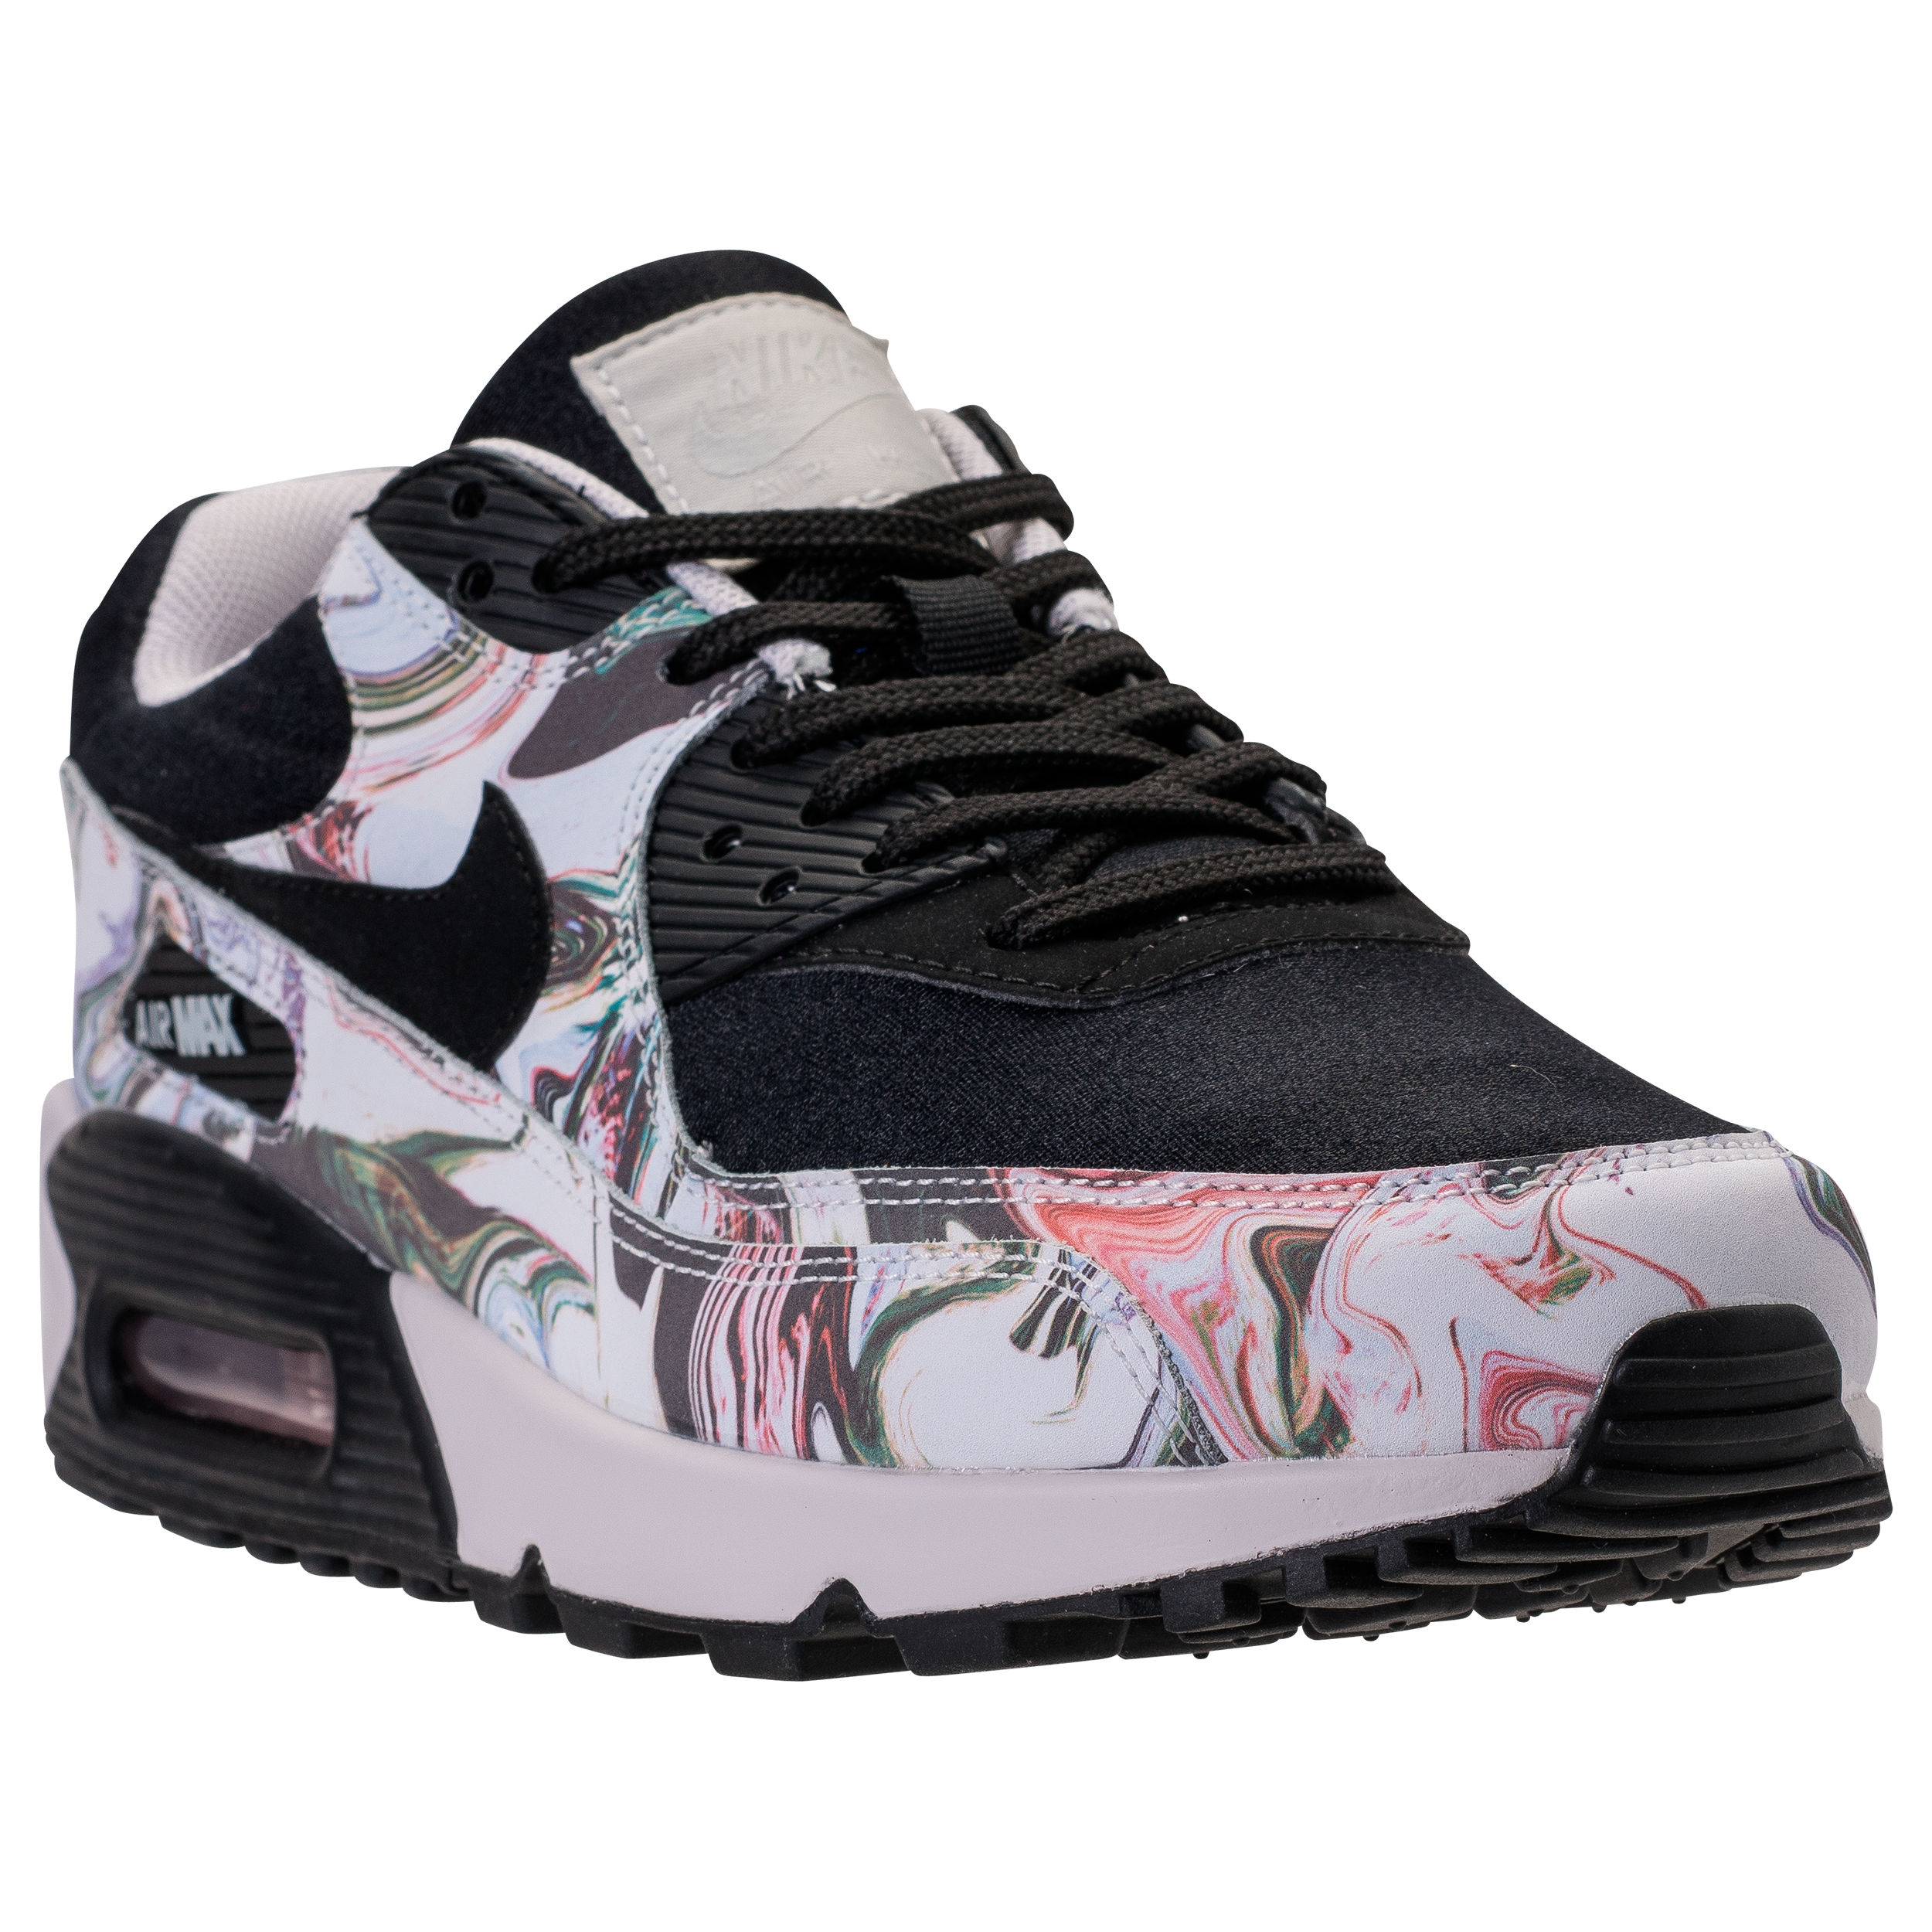 nike air max 90 marble 4-20 - WearTesters